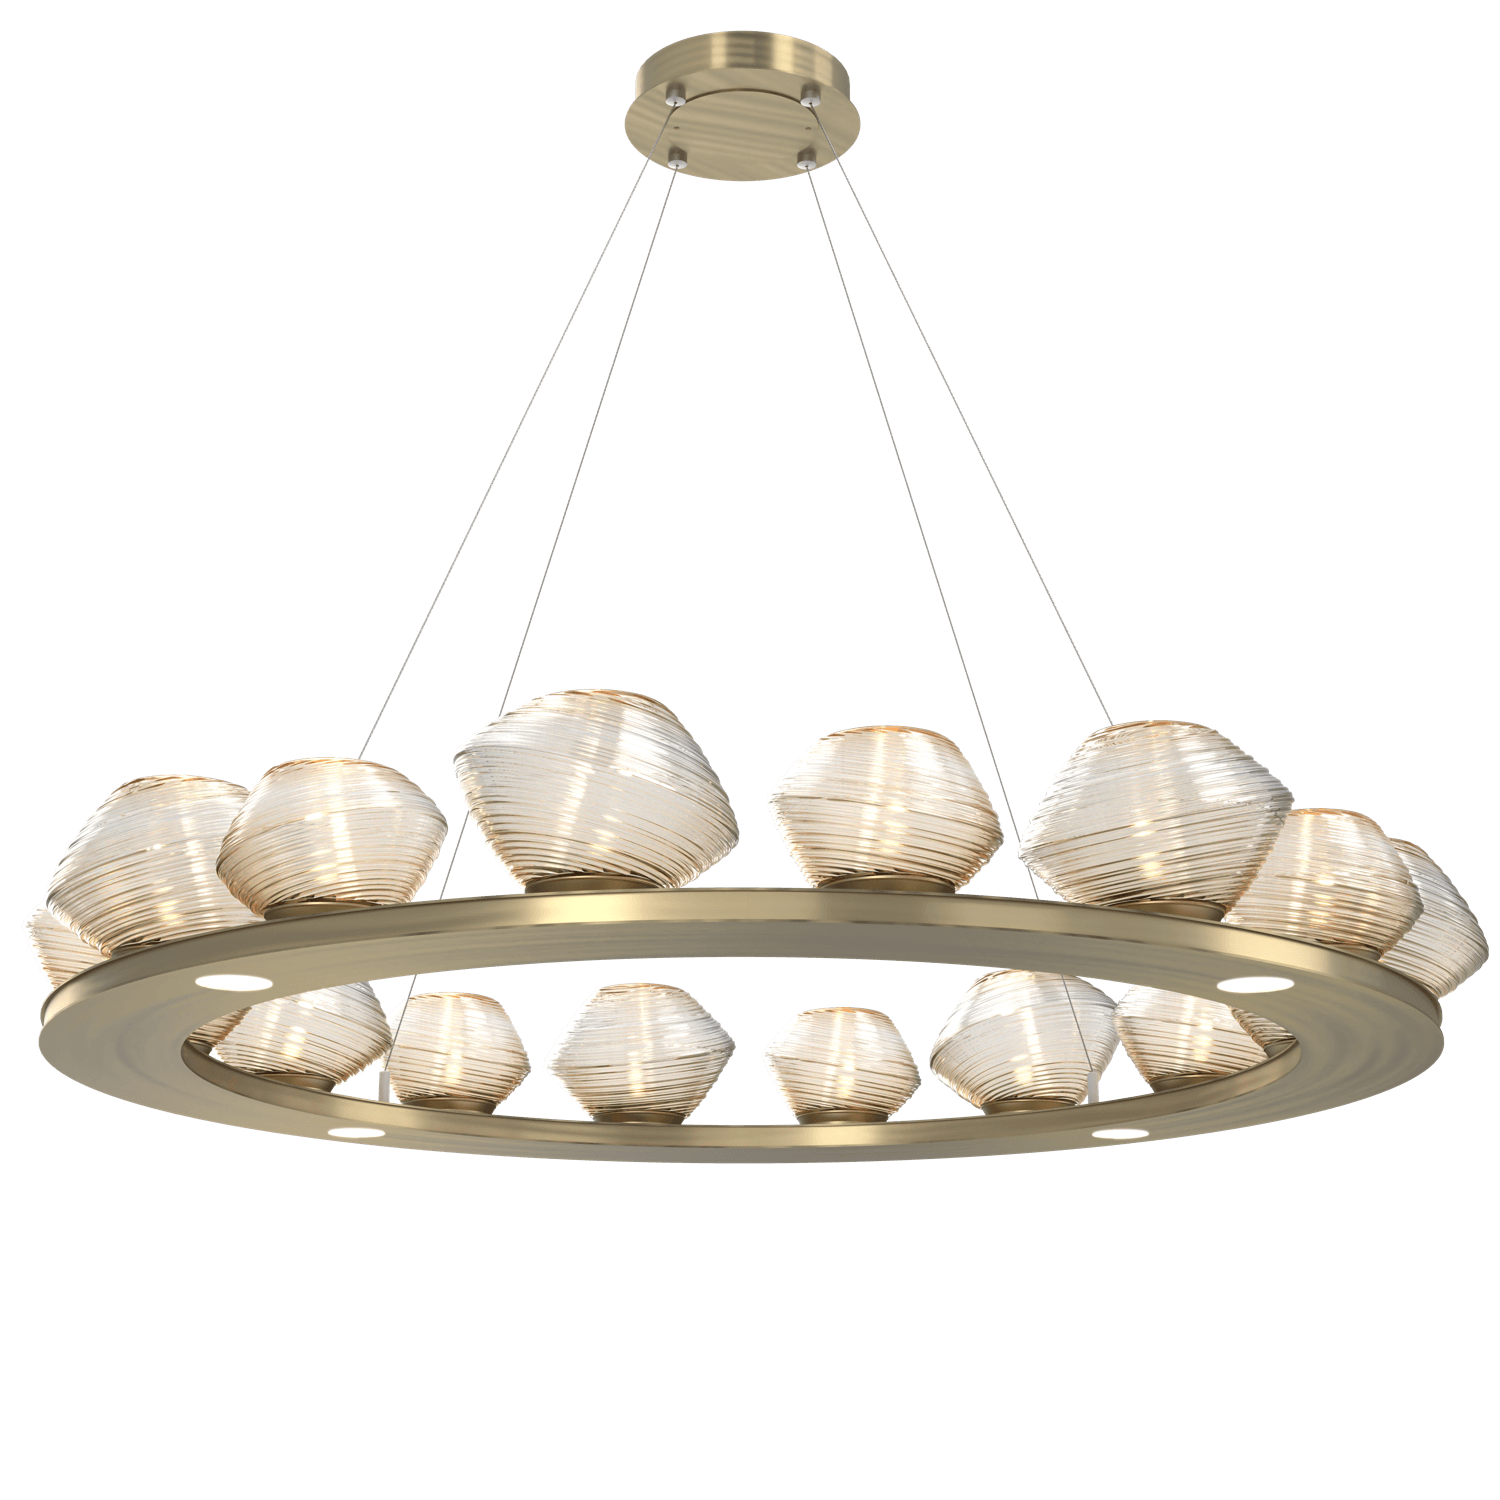 CHB0089-0D-HB-A-Hammerton-Studio-Mesa-48-inch-ring-chandelier-with-heritage-brass-finish-and-amber-blown-glass-shades-and-LED-lamping